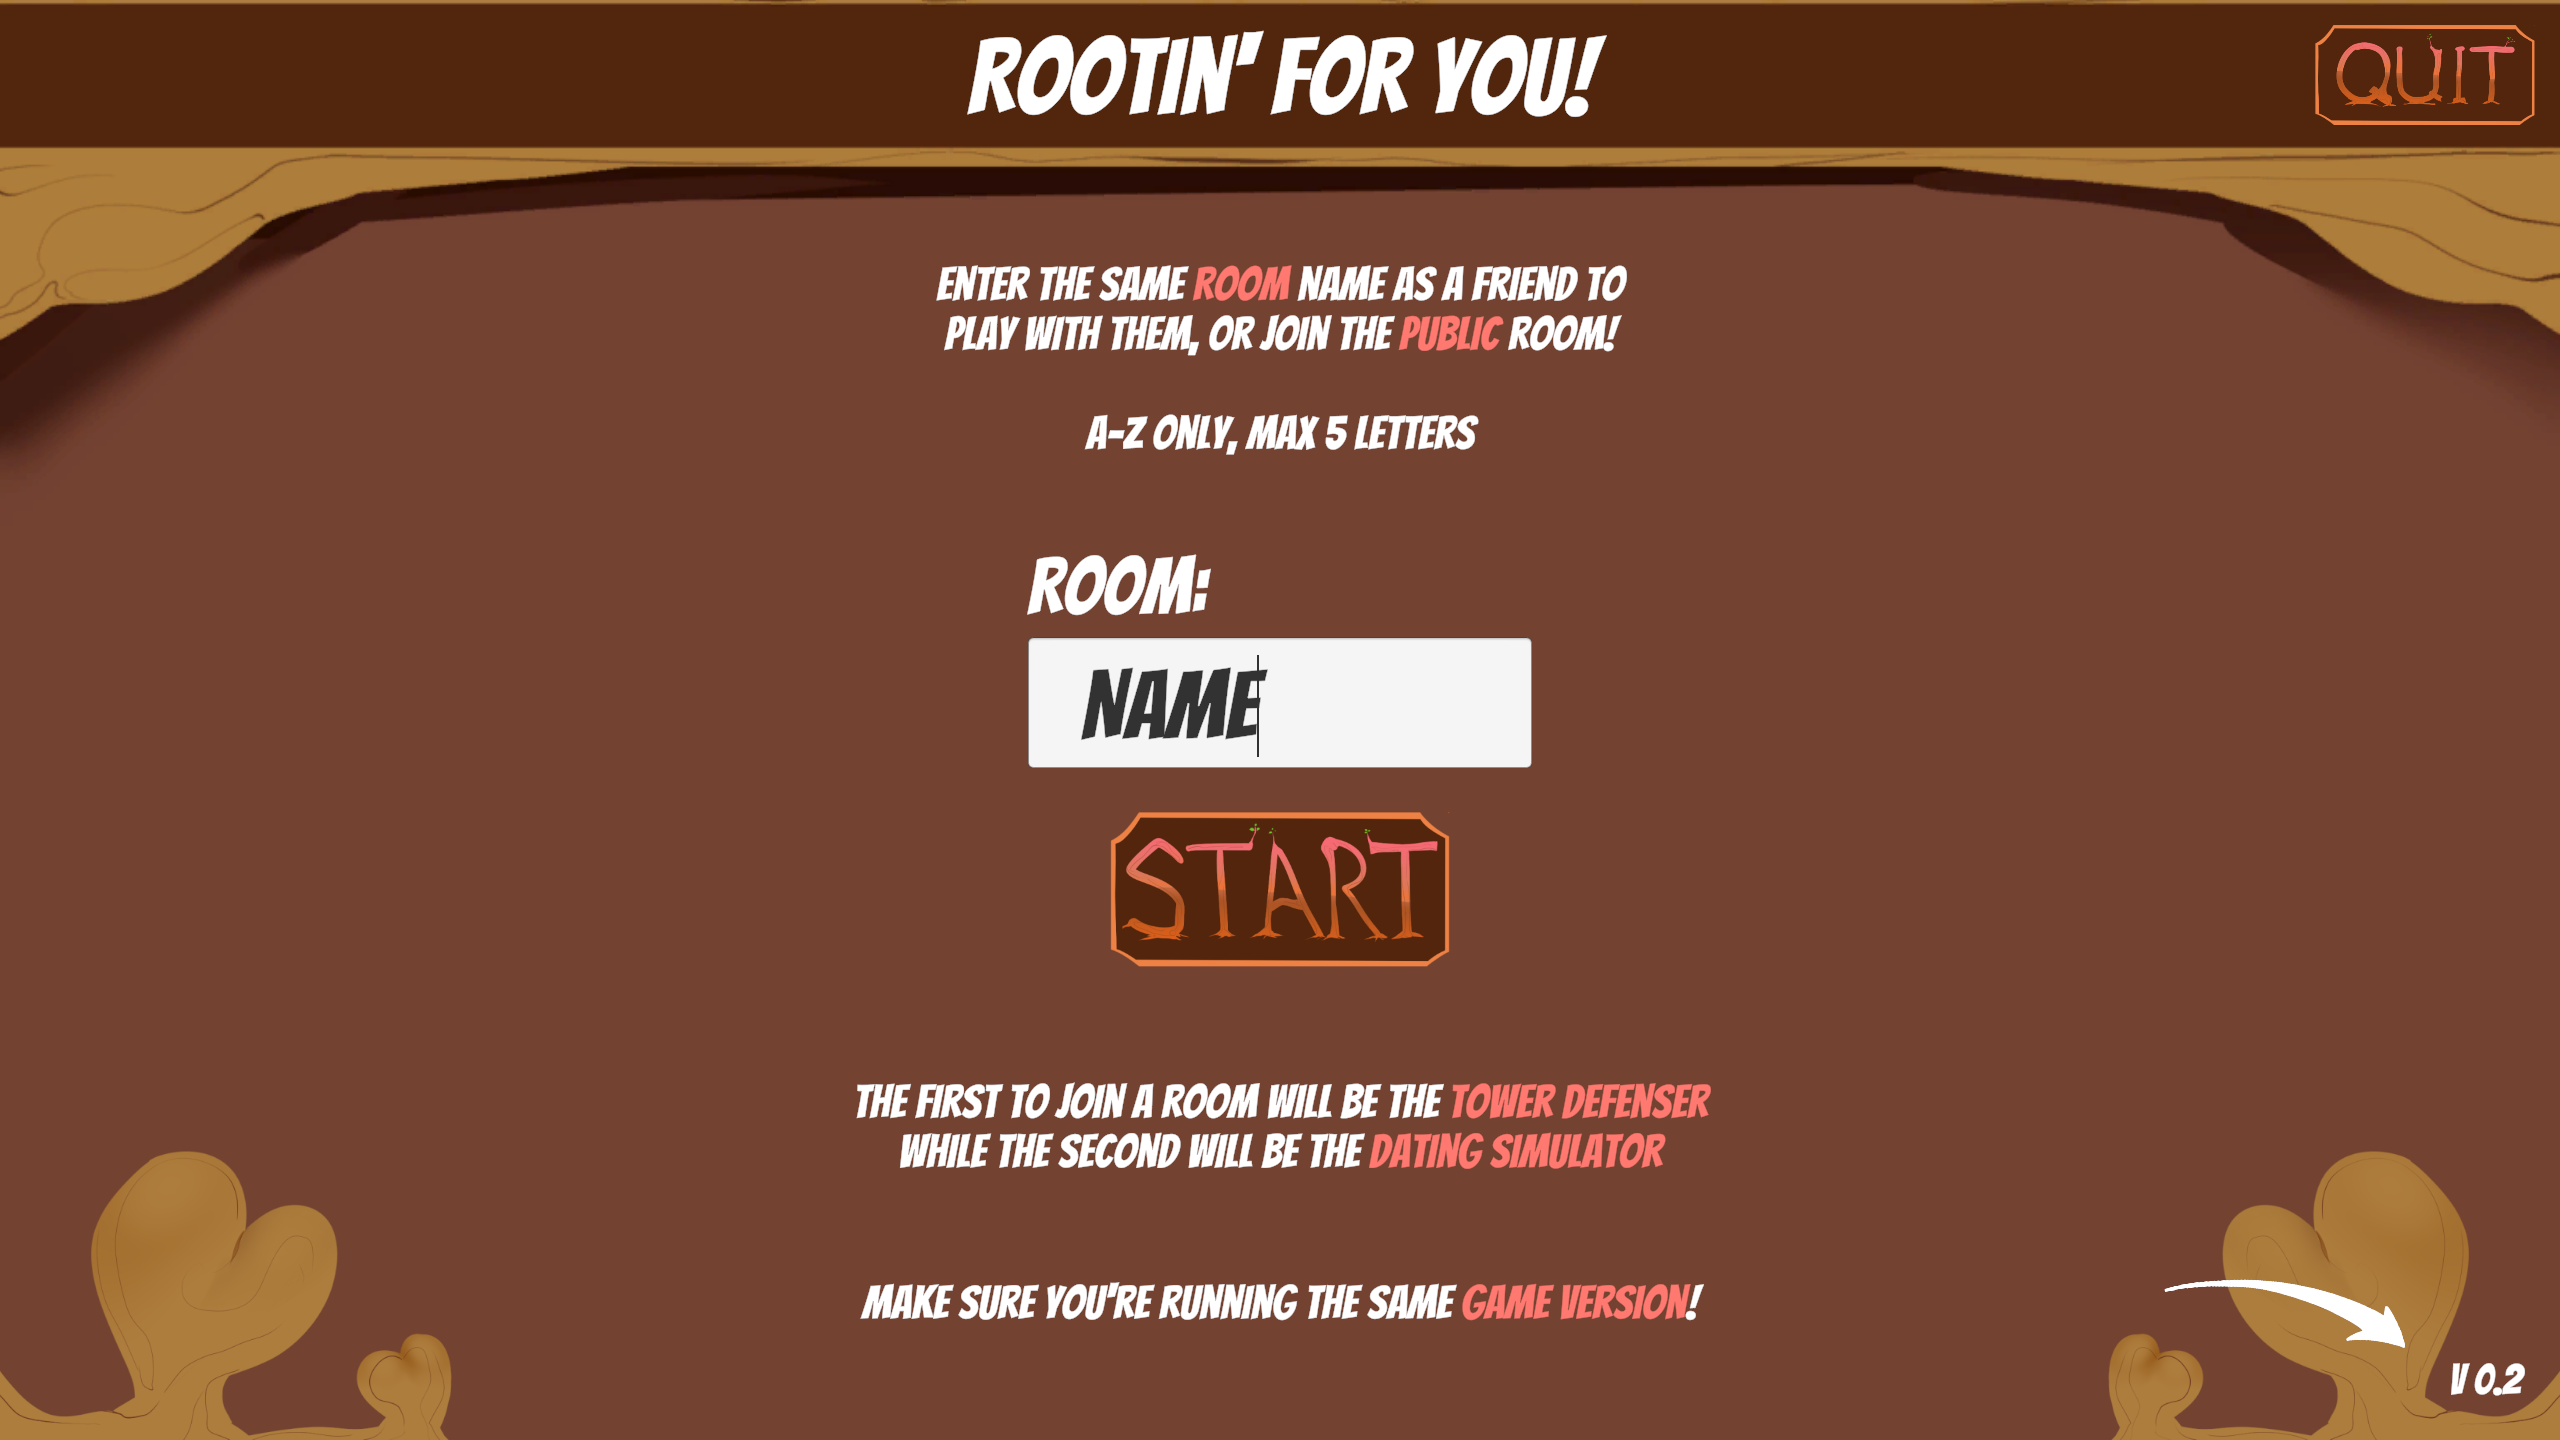 New Rootin’ For You start menu with a room name option